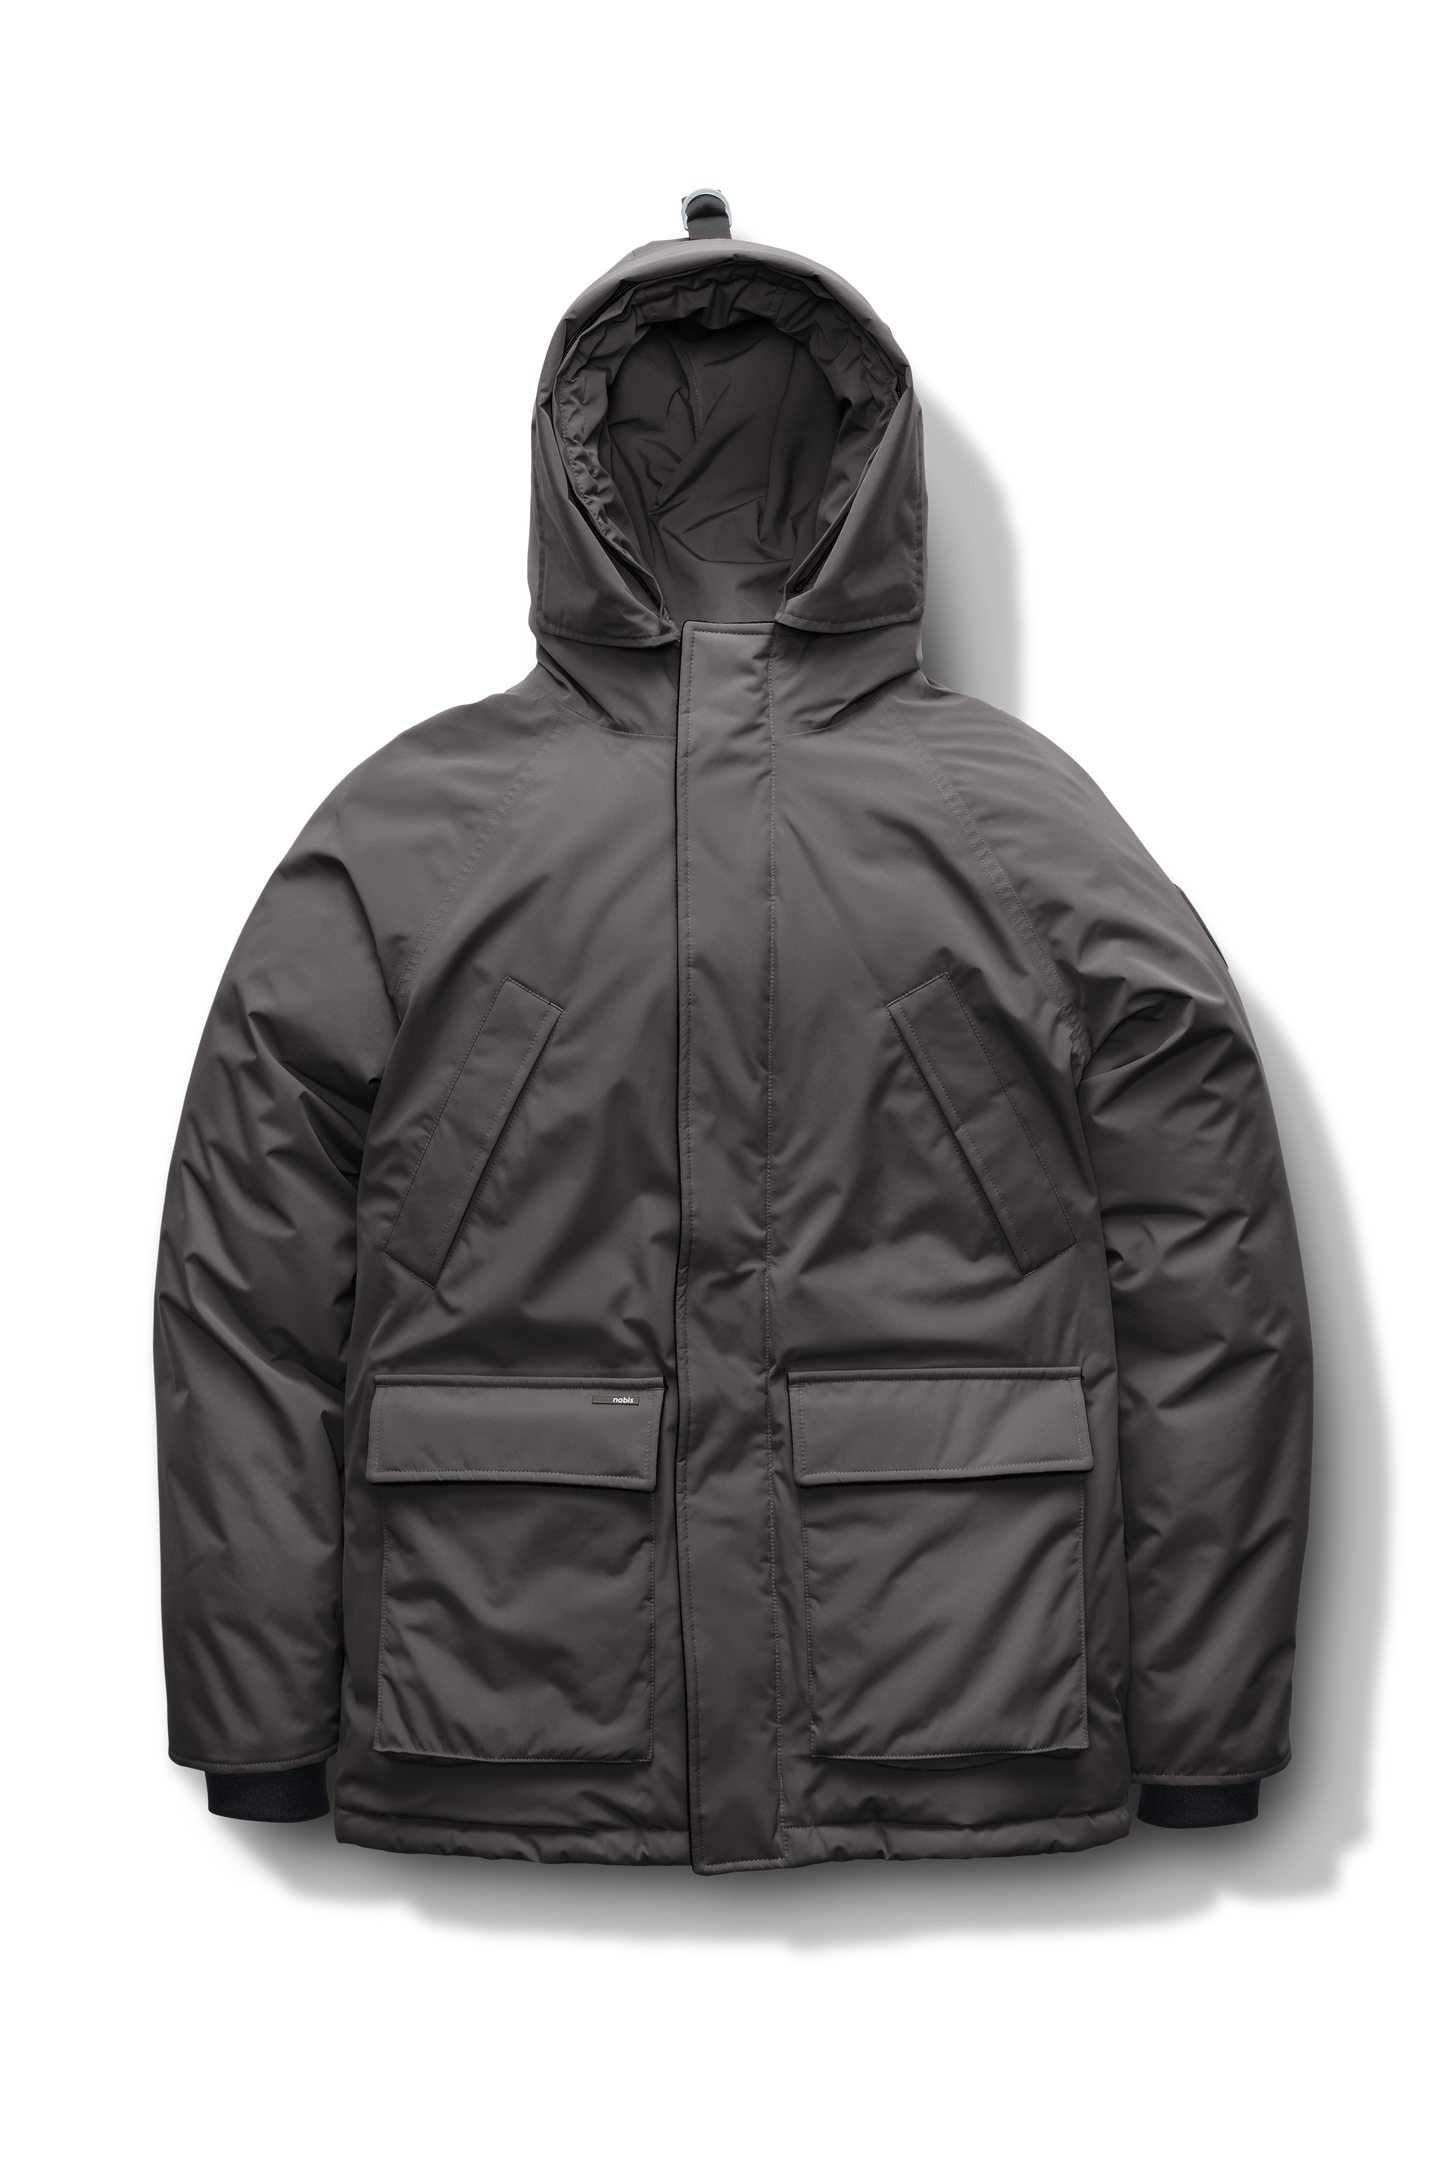 Heritage Furless Men's Parka in hip length, Canadian white duck down insulation, non-removable hood, front zipper with magnetic placket, chest hand warmer pockets, waist flap pockets, and elastic cuffs, in Steel Grey